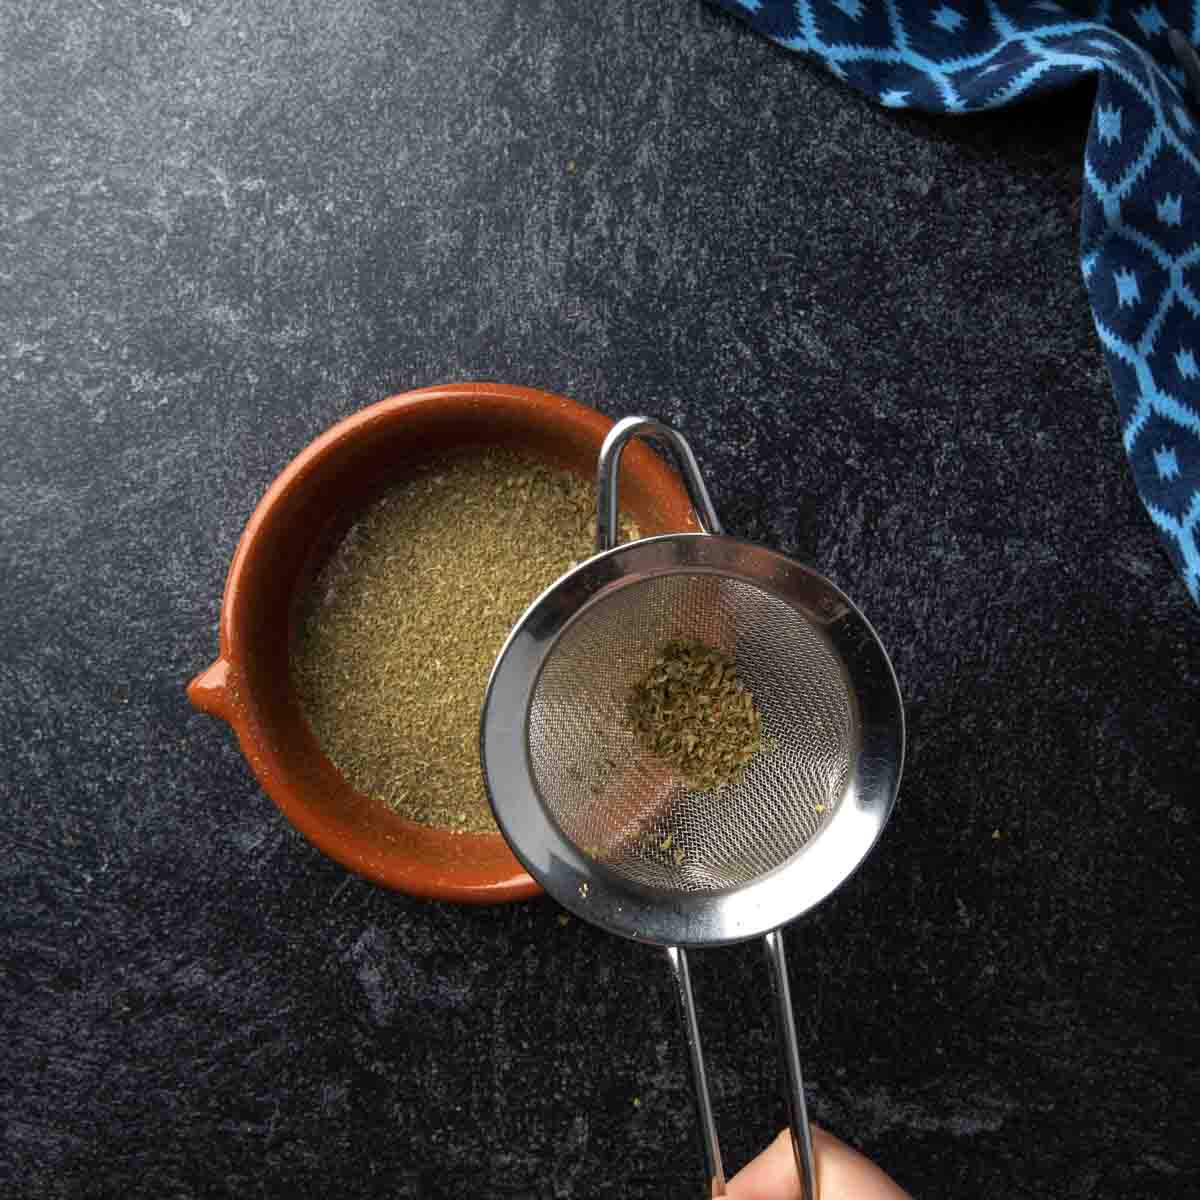 Sifted dried mint and oregano through a fine mesh strainer.